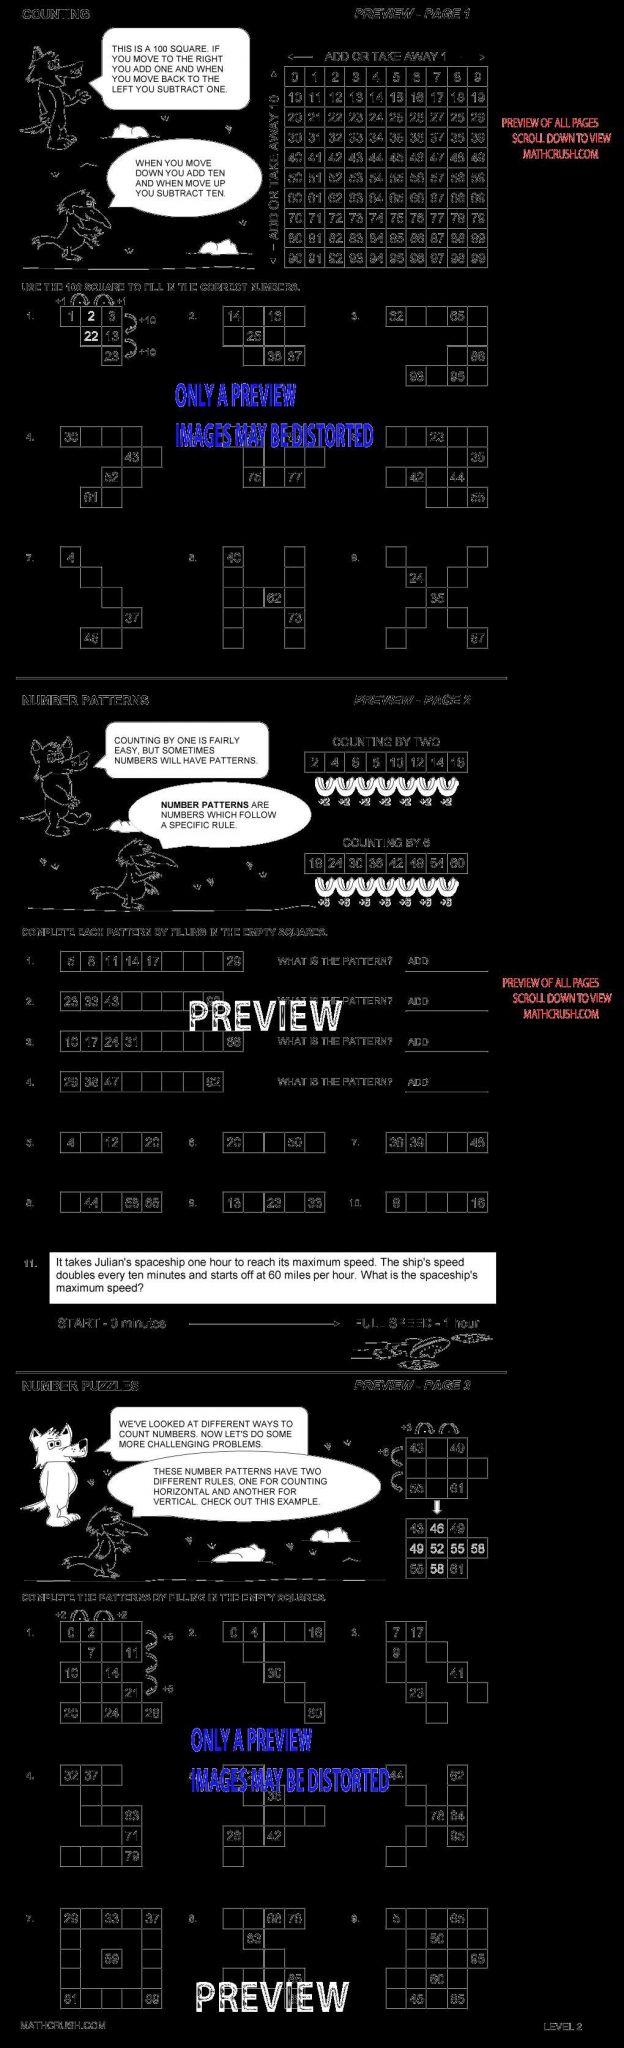 Skills Worksheet Concept Review Answers with Puzzles Thinking Word Problems by Math Crush